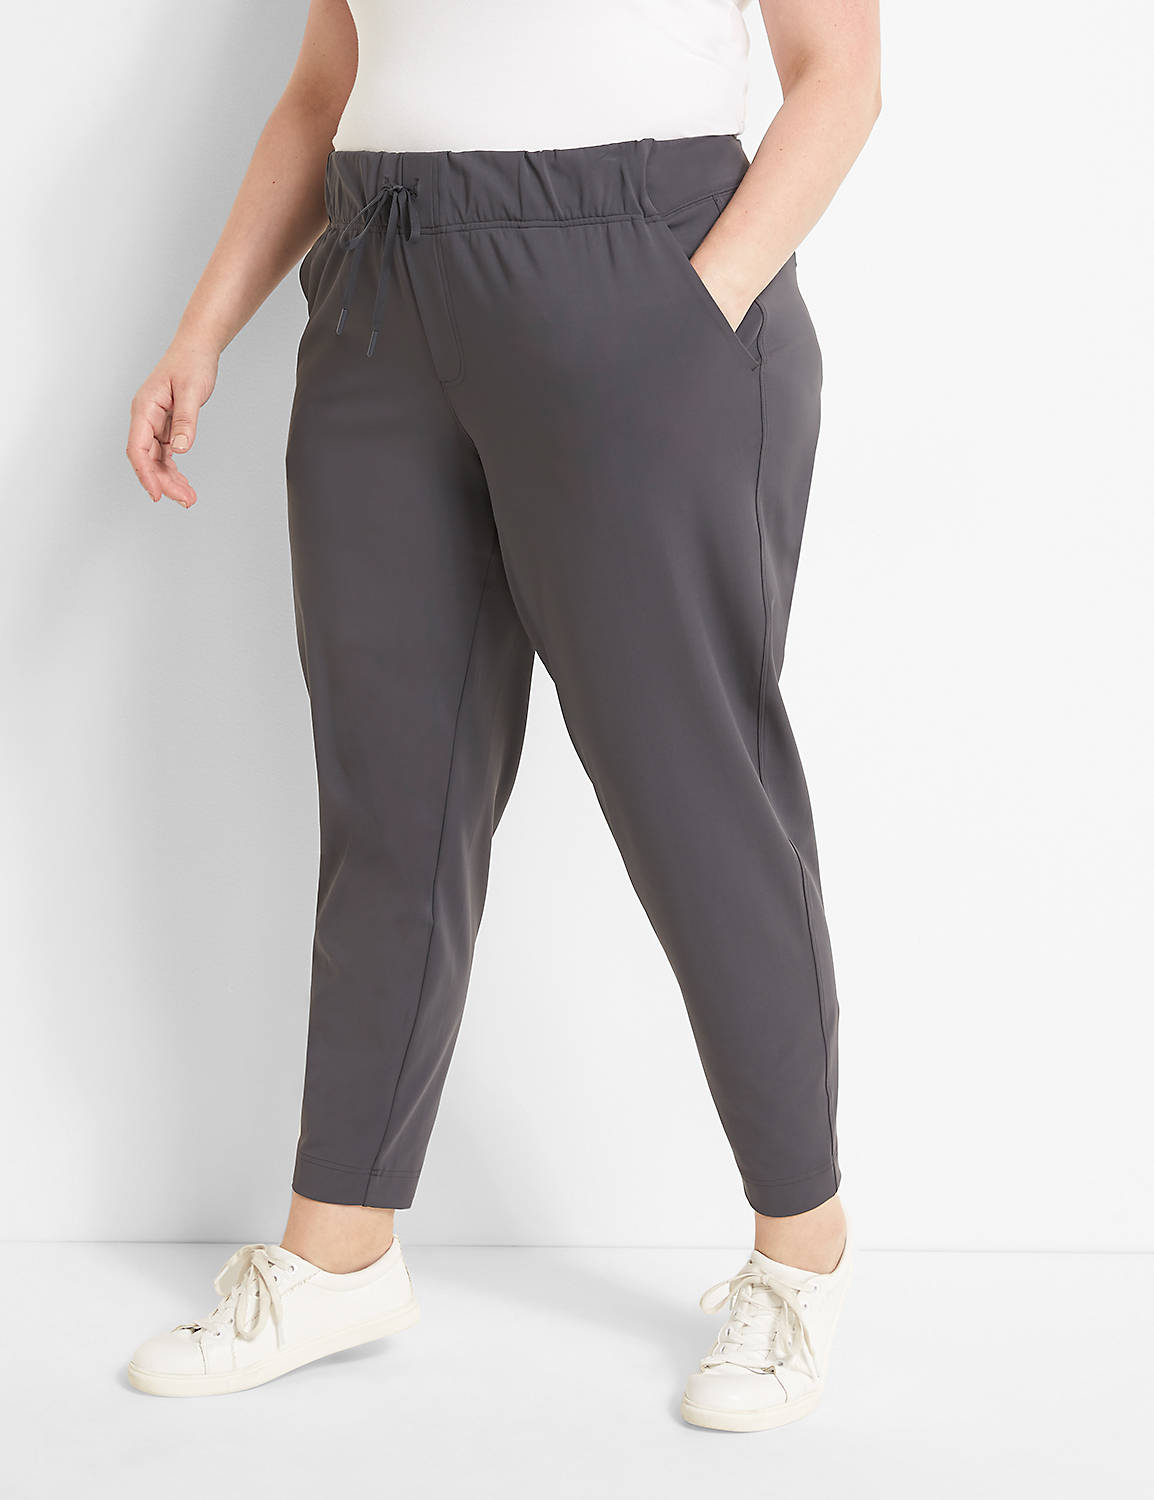 1105749 F Knit Stretch Trouser Product Image 1